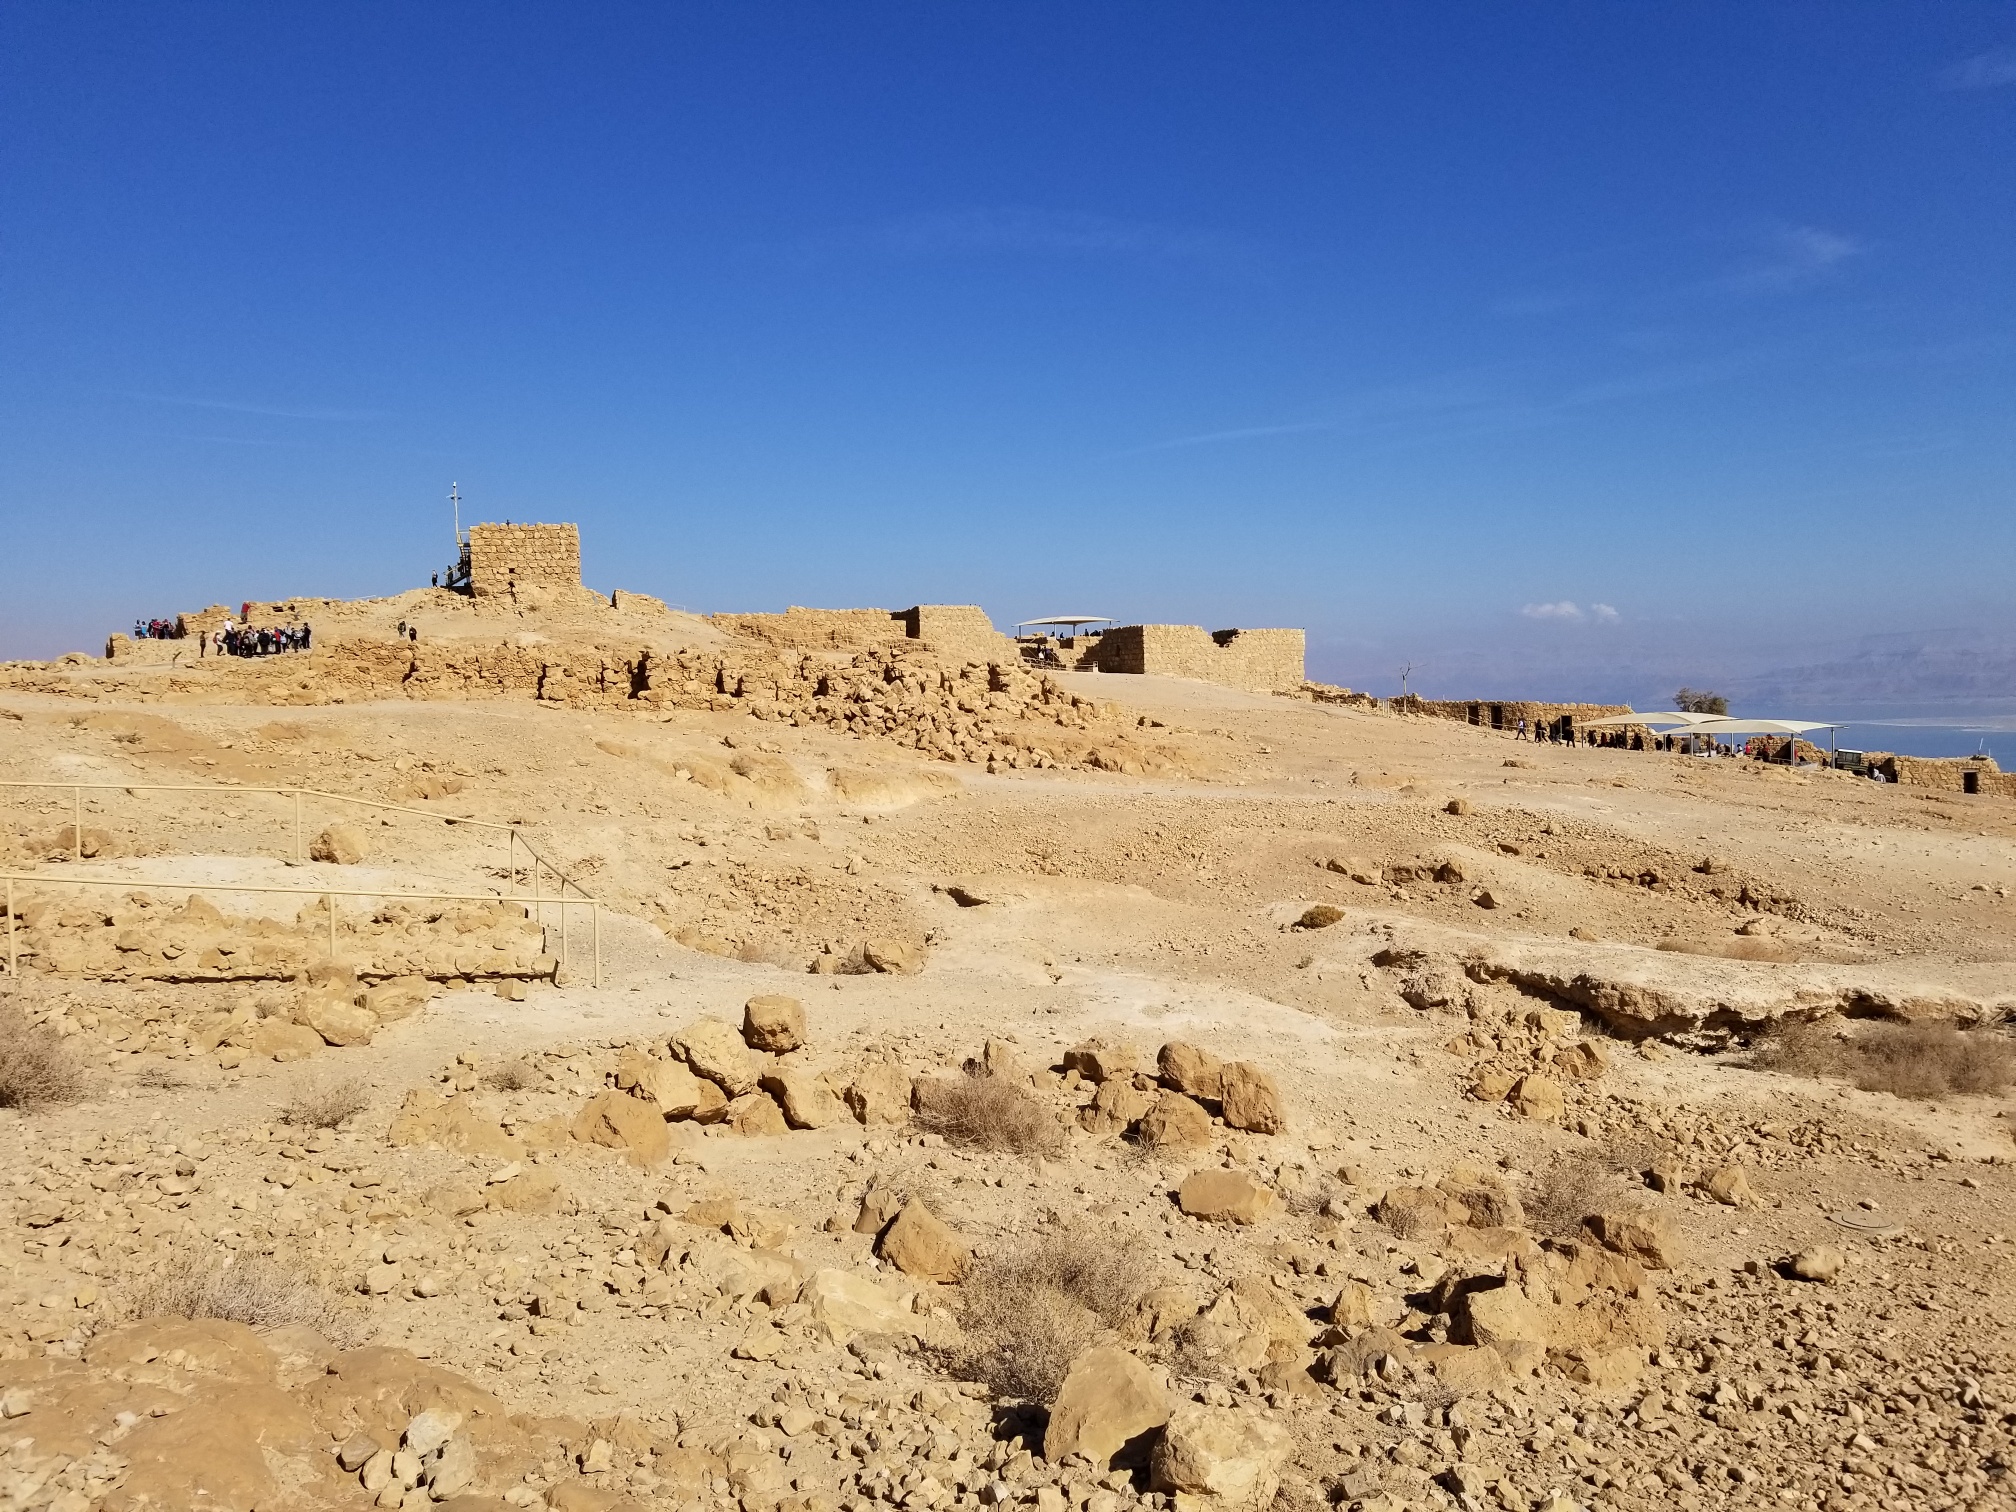 Ruins of Masada from on top of the butte